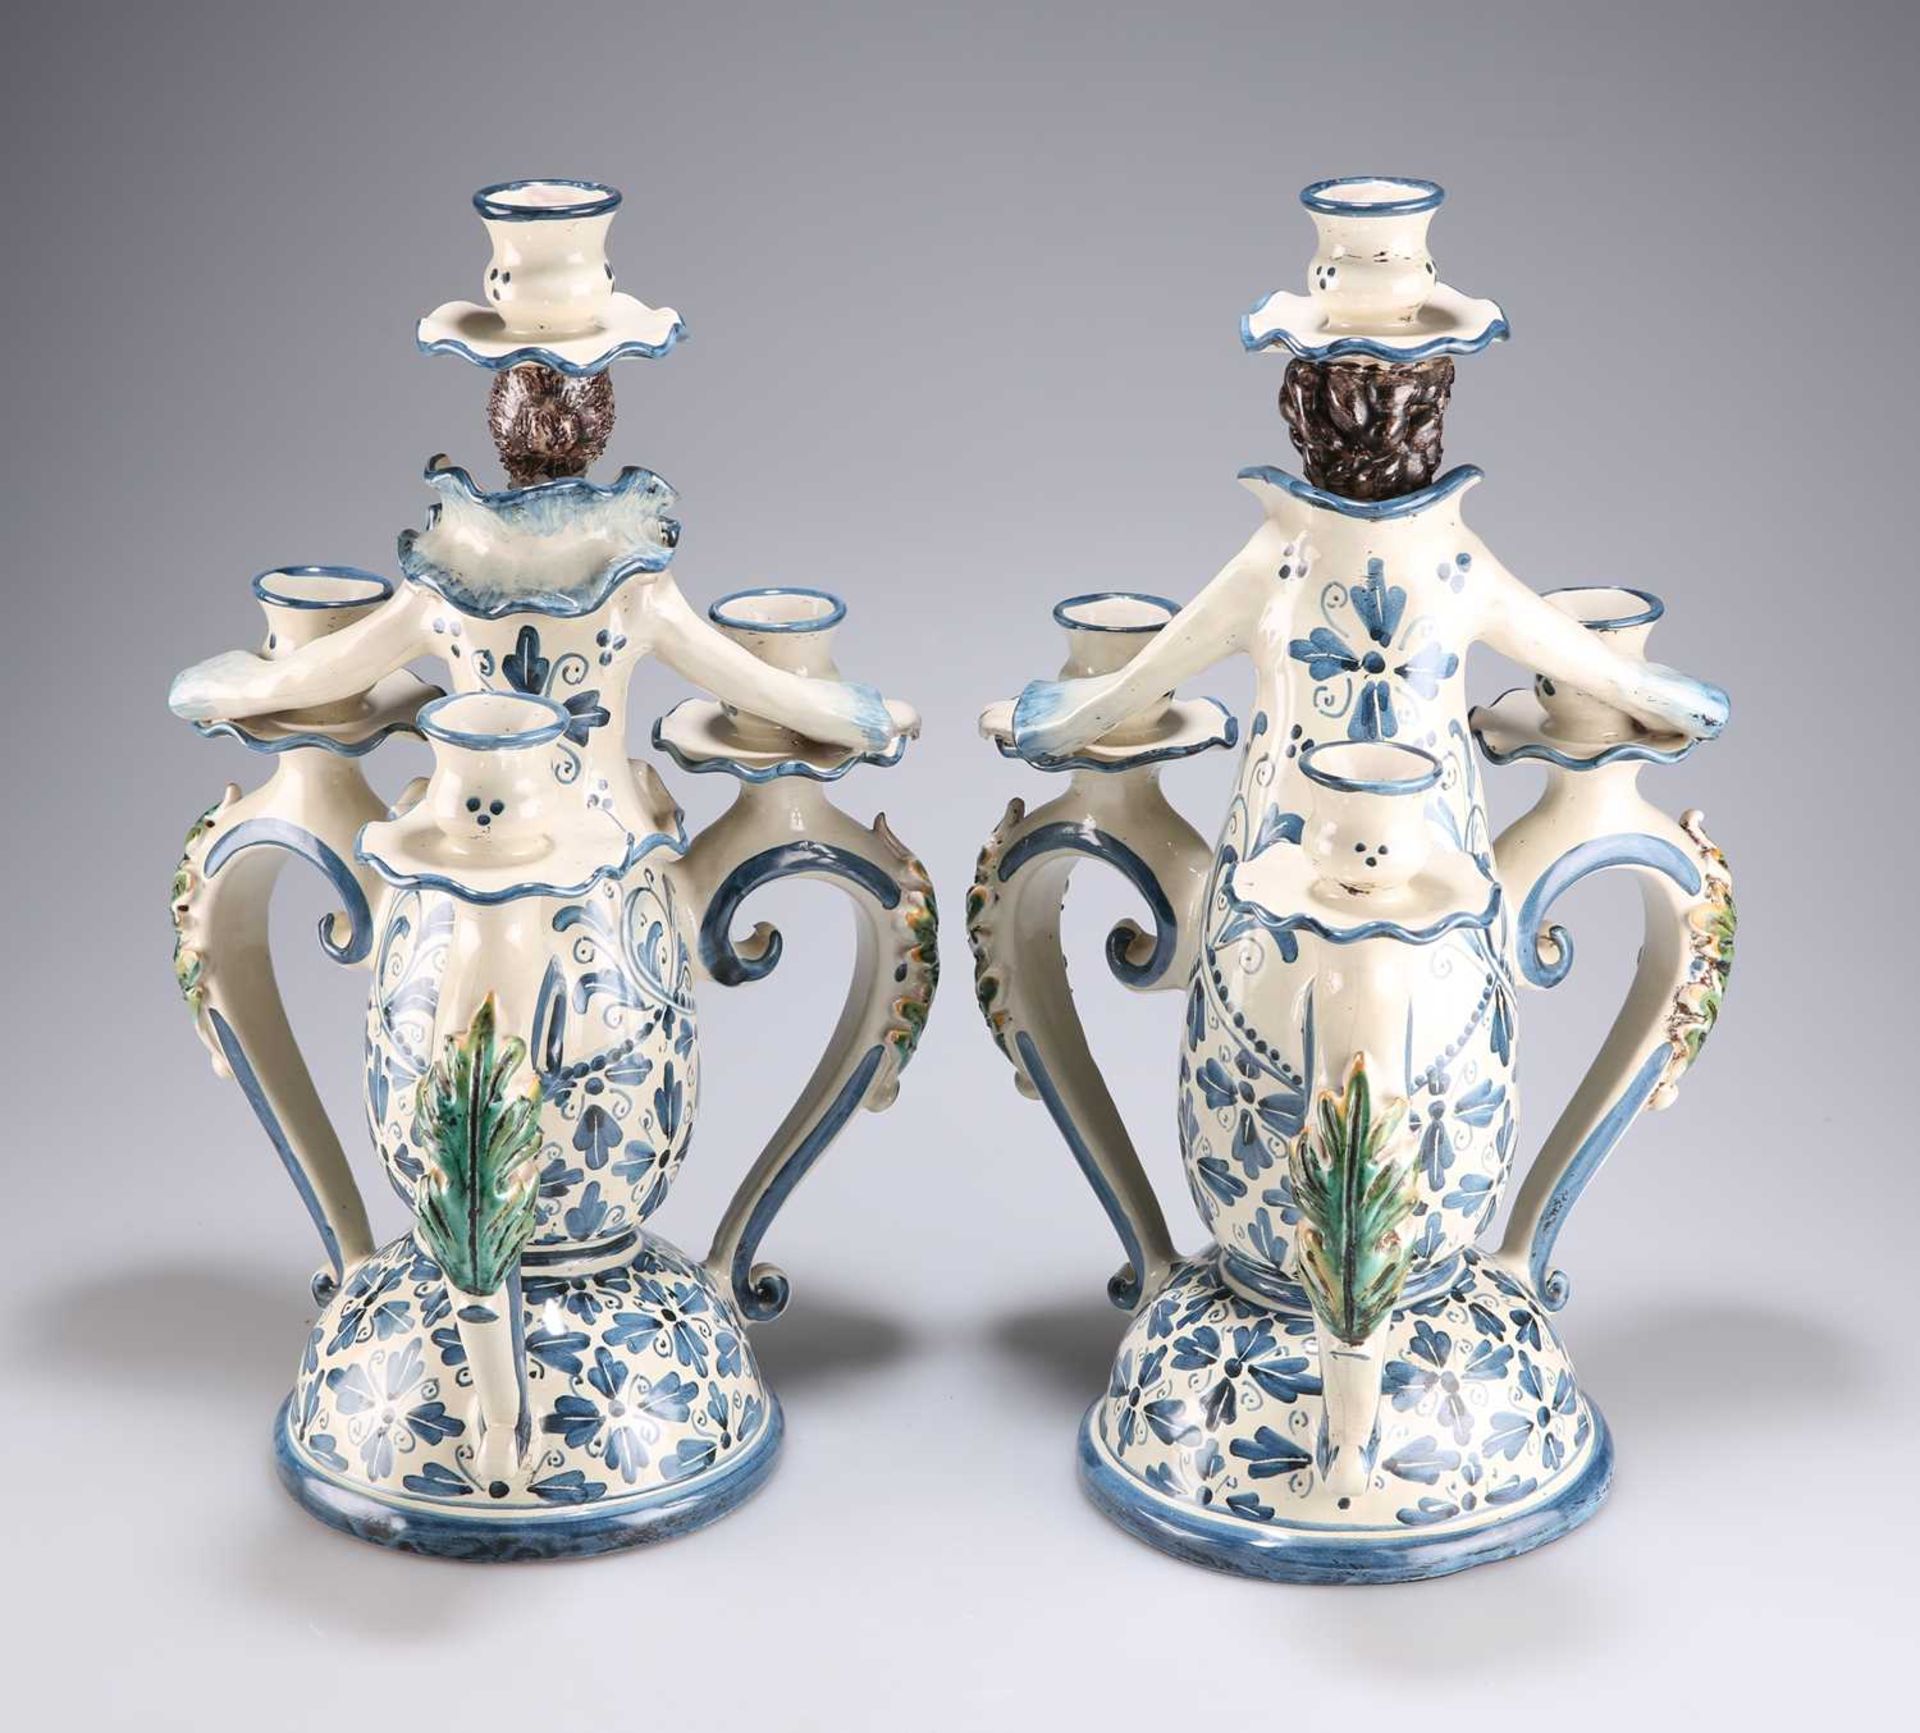 A PAIR OF CONTINENTAL FAÏENCE FIGURAL CANDELABRA, CIRCA 1900 - Image 2 of 2